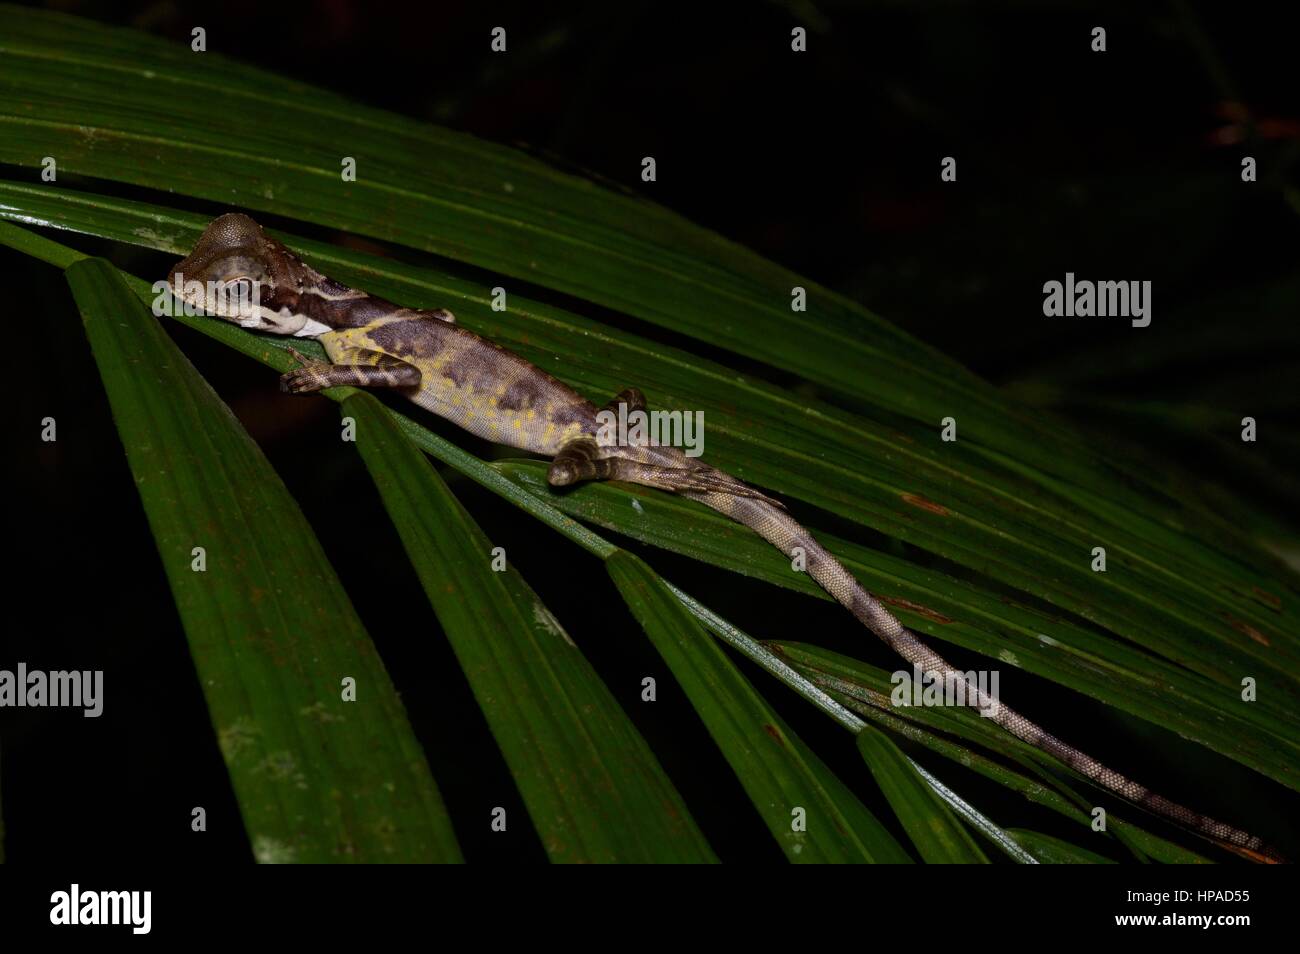 A young Great Anglehead Lizard (Gonocephalus grandis) resting in the Malaysian rainforest at night Stock Photo